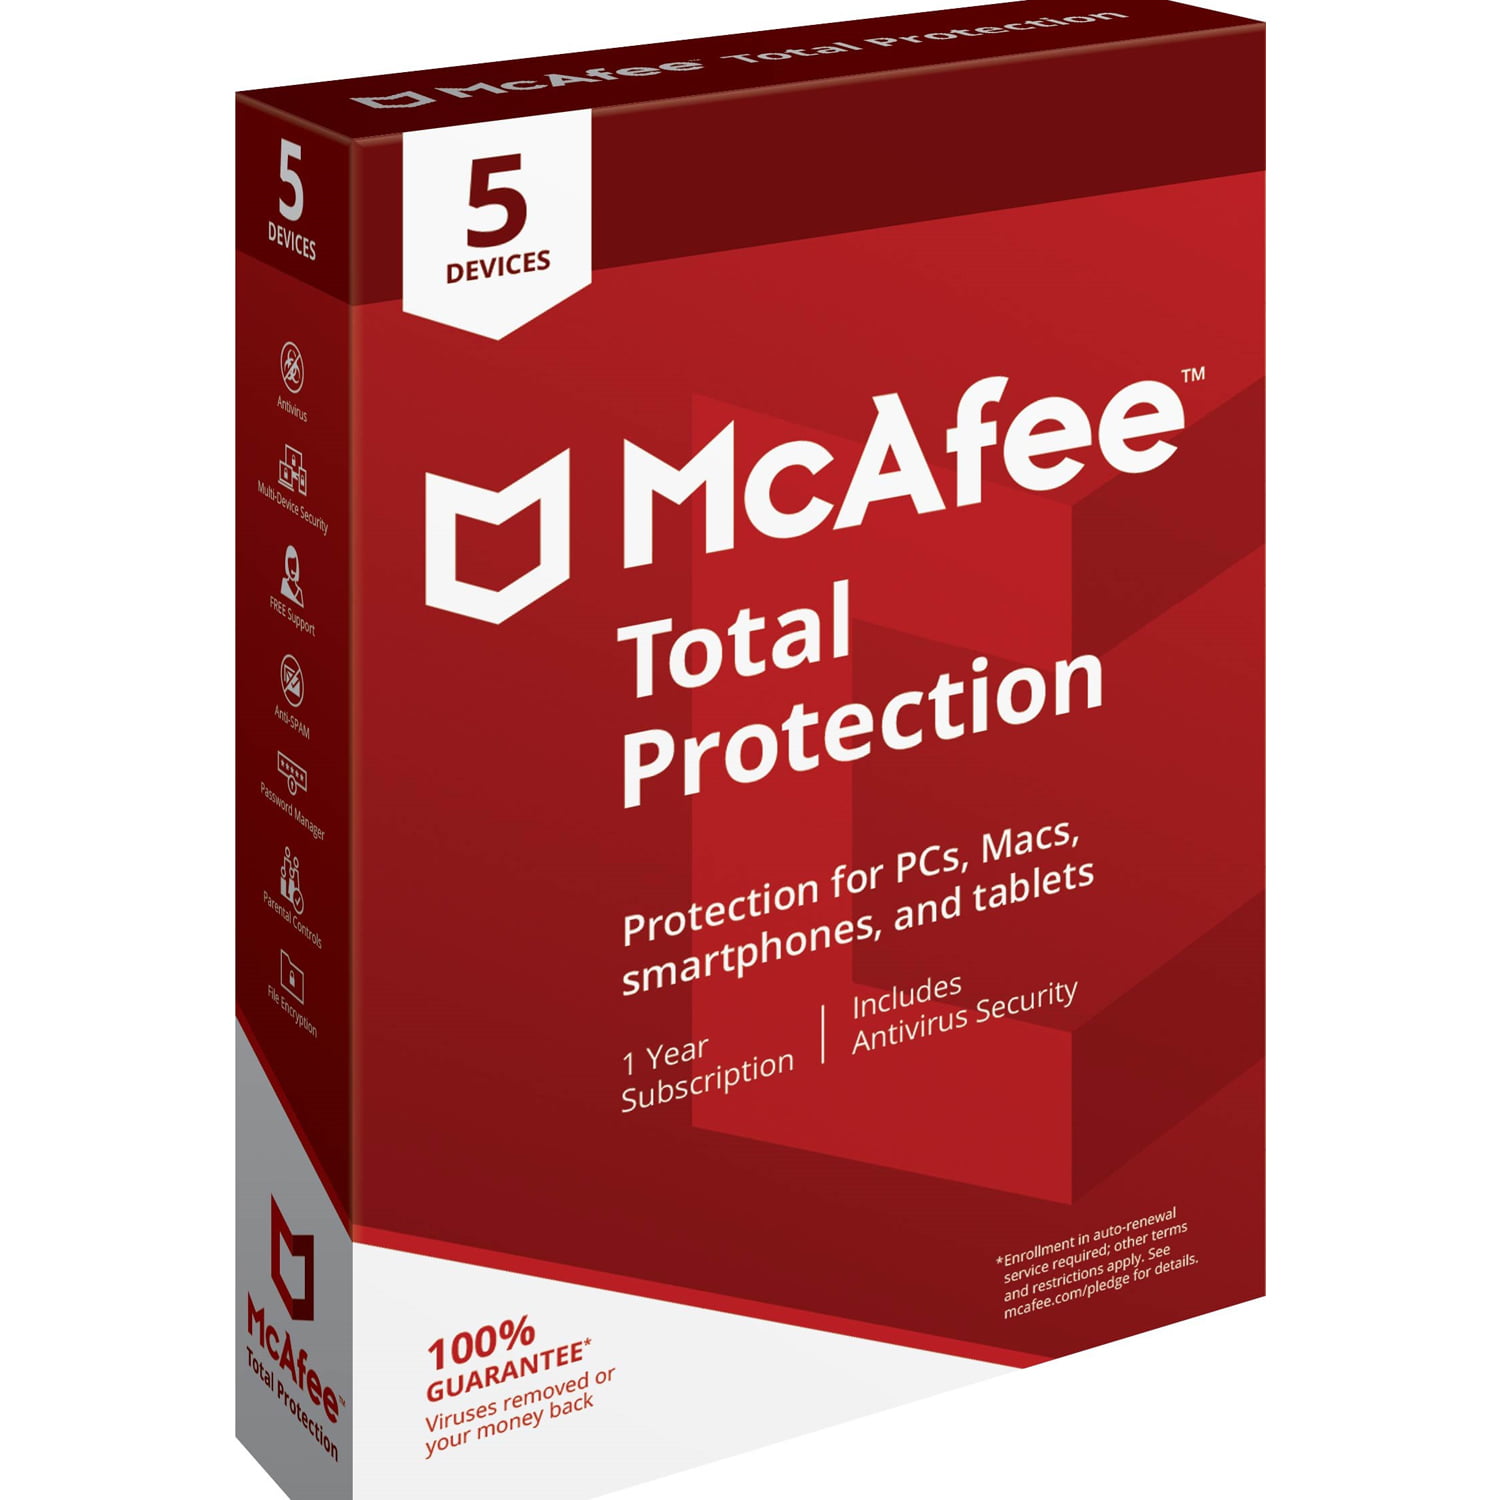 mcafee total protection download